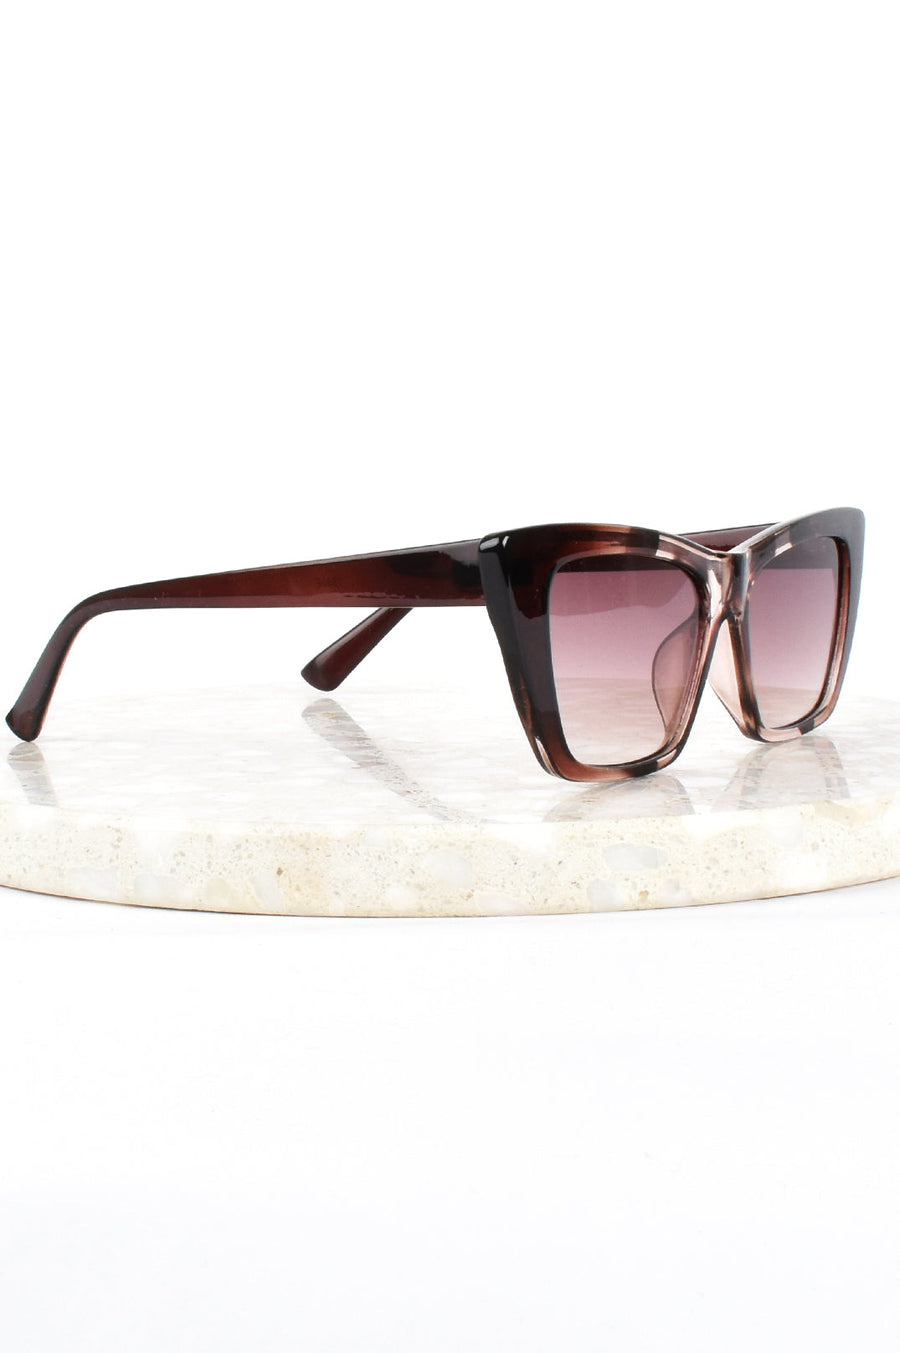 HEAVENLY POINTED SUNGLASSES